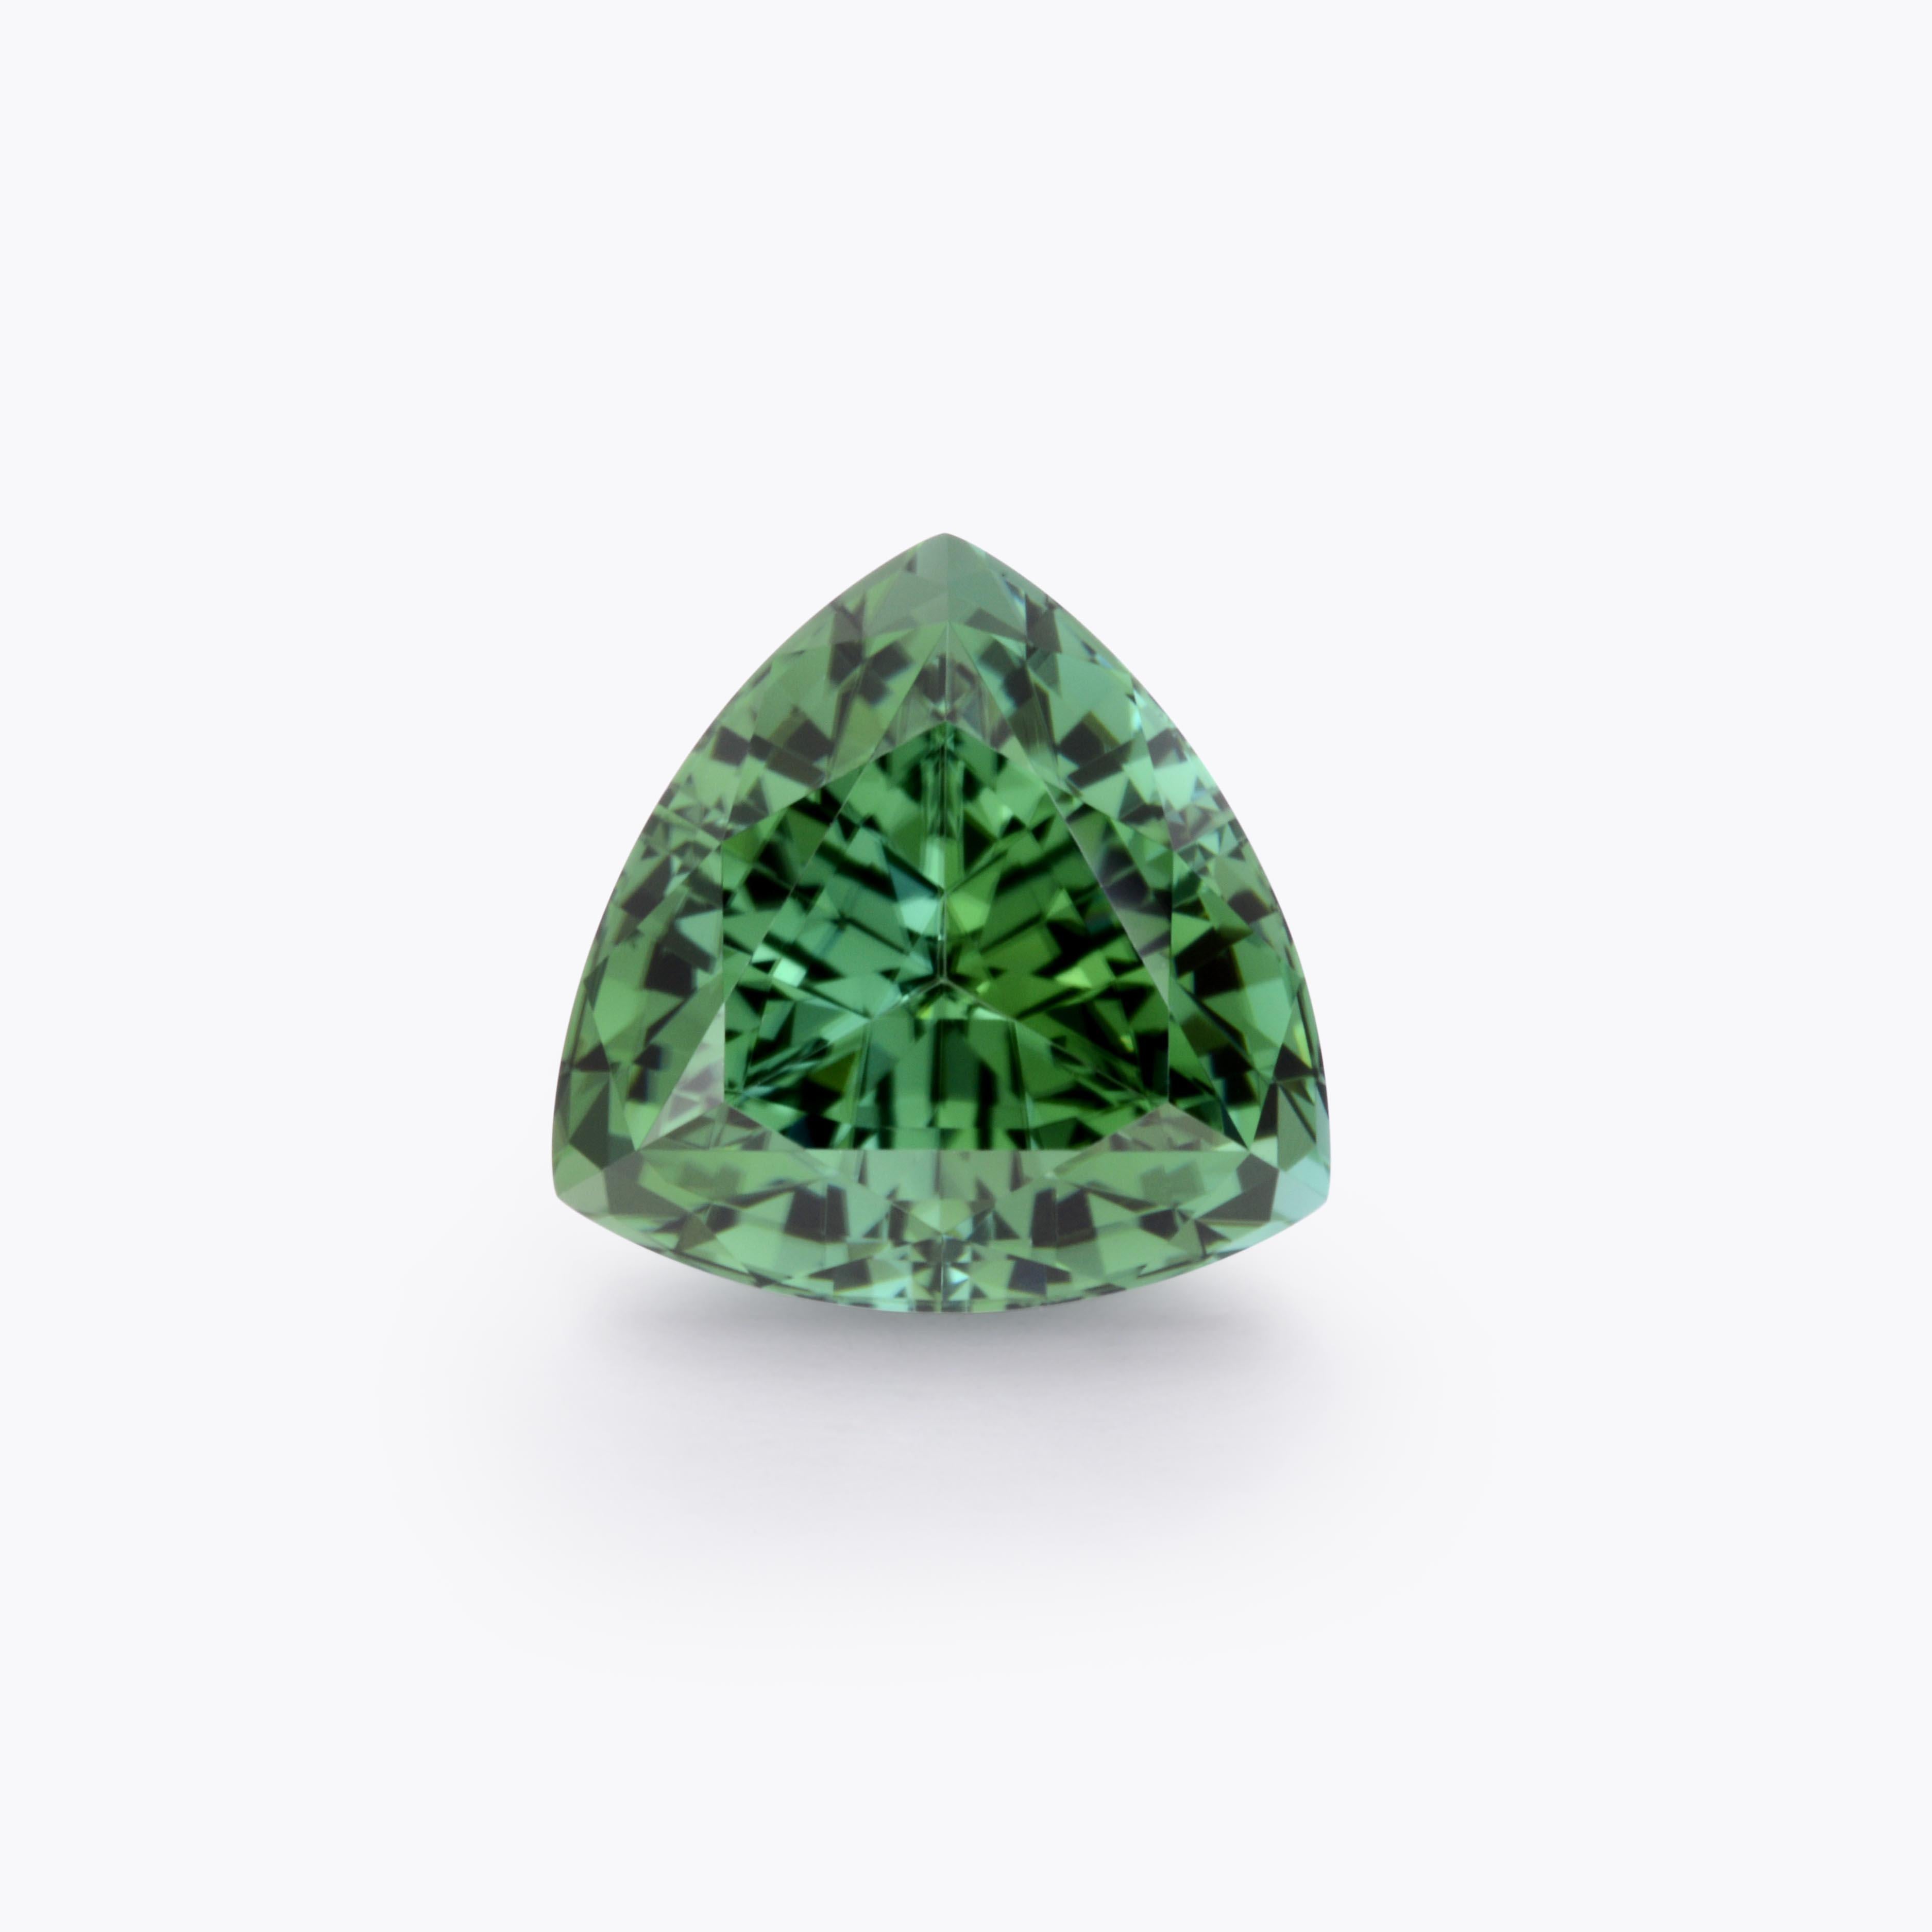 Exquisite 7.86 carat Mint Green Tourmaline trillion shaped gem, offered unmounted to a very unique lady or gentleman.
Dimensions: 12.6 x 12.6 x 8.7 mm.
Returns are accepted and paid by us within 7 days of delivery.
We offer supreme custom jewelry